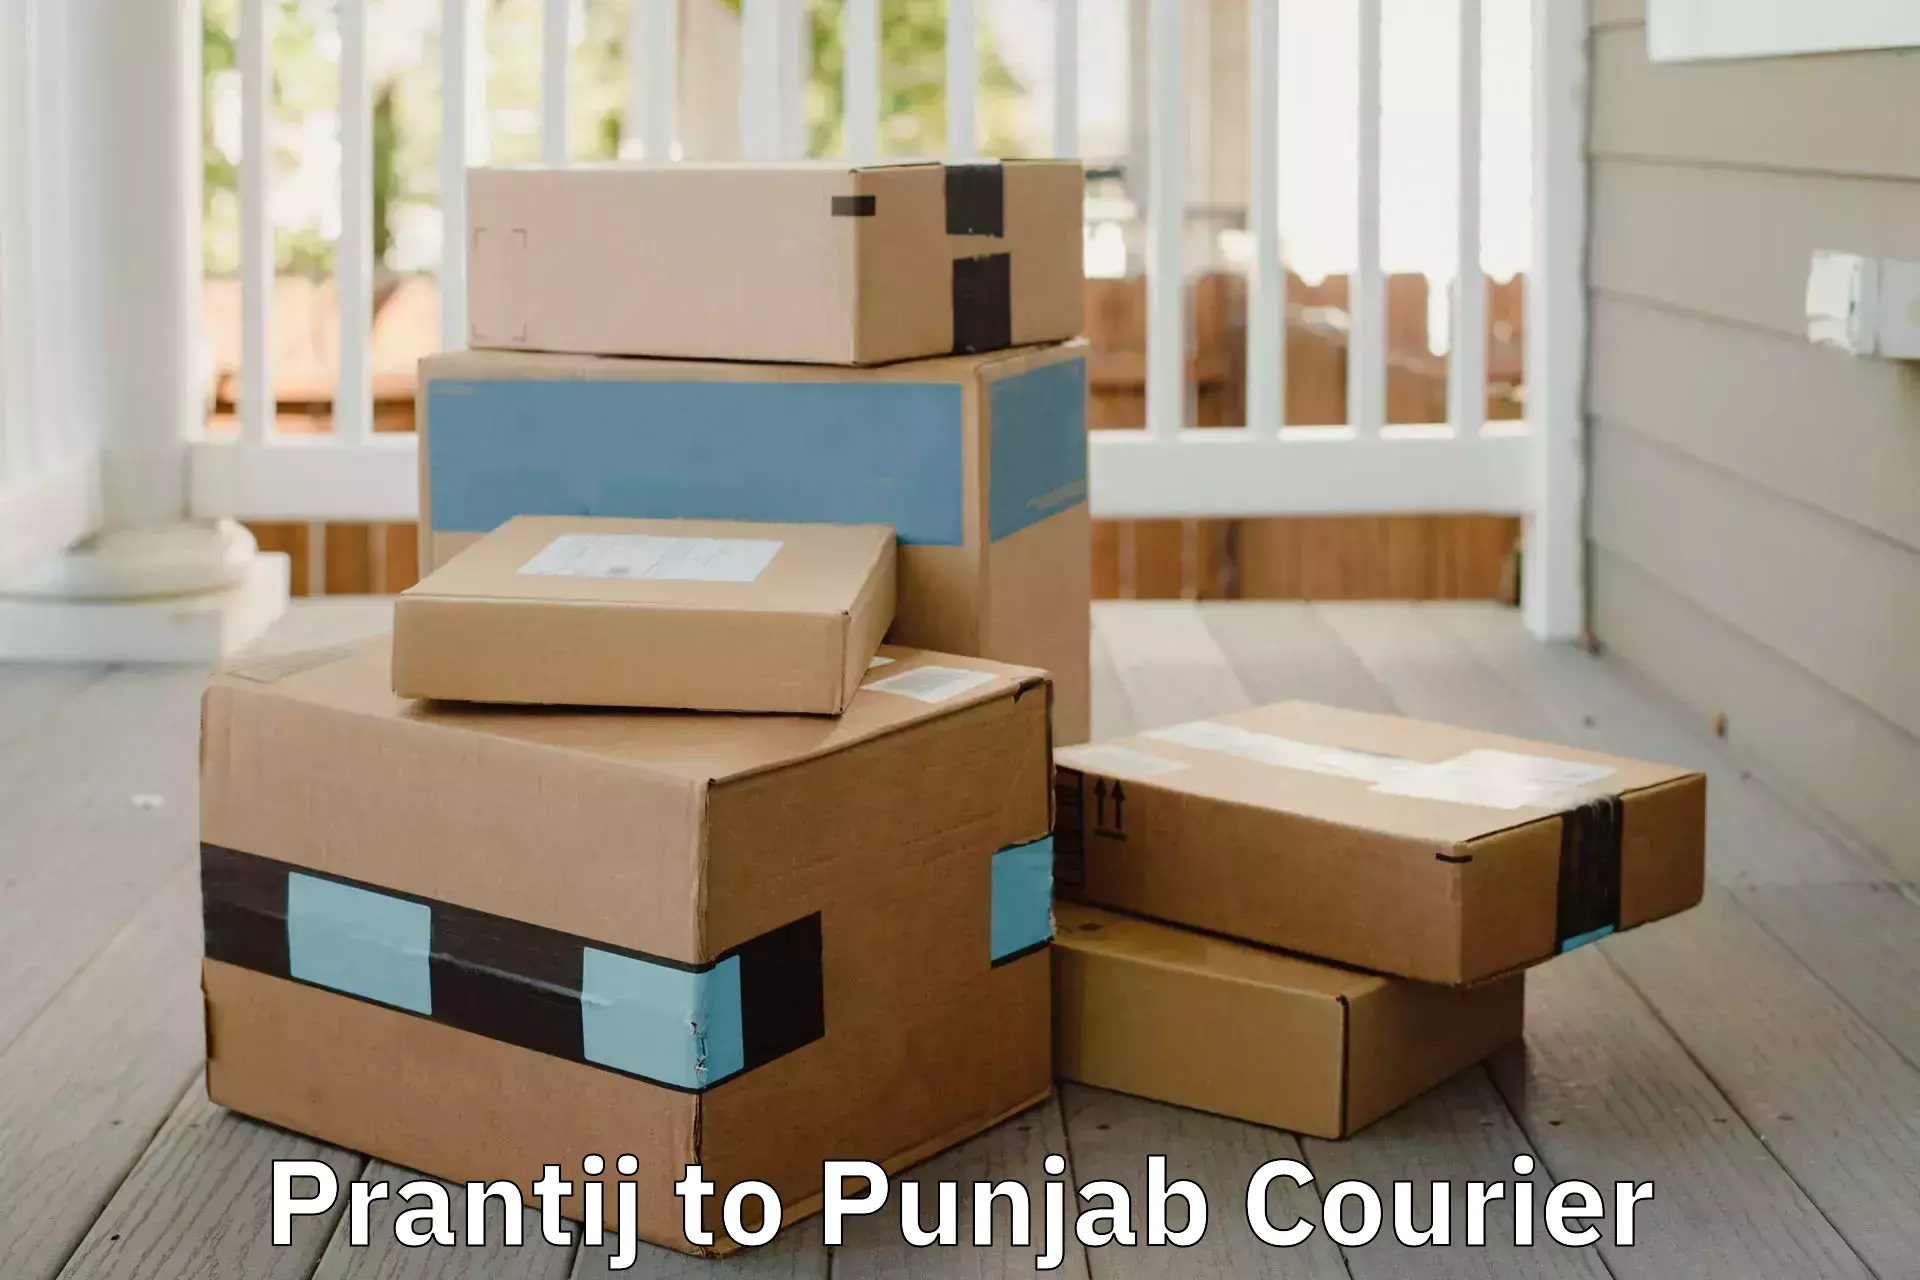 Trusted relocation experts Prantij to Punjab